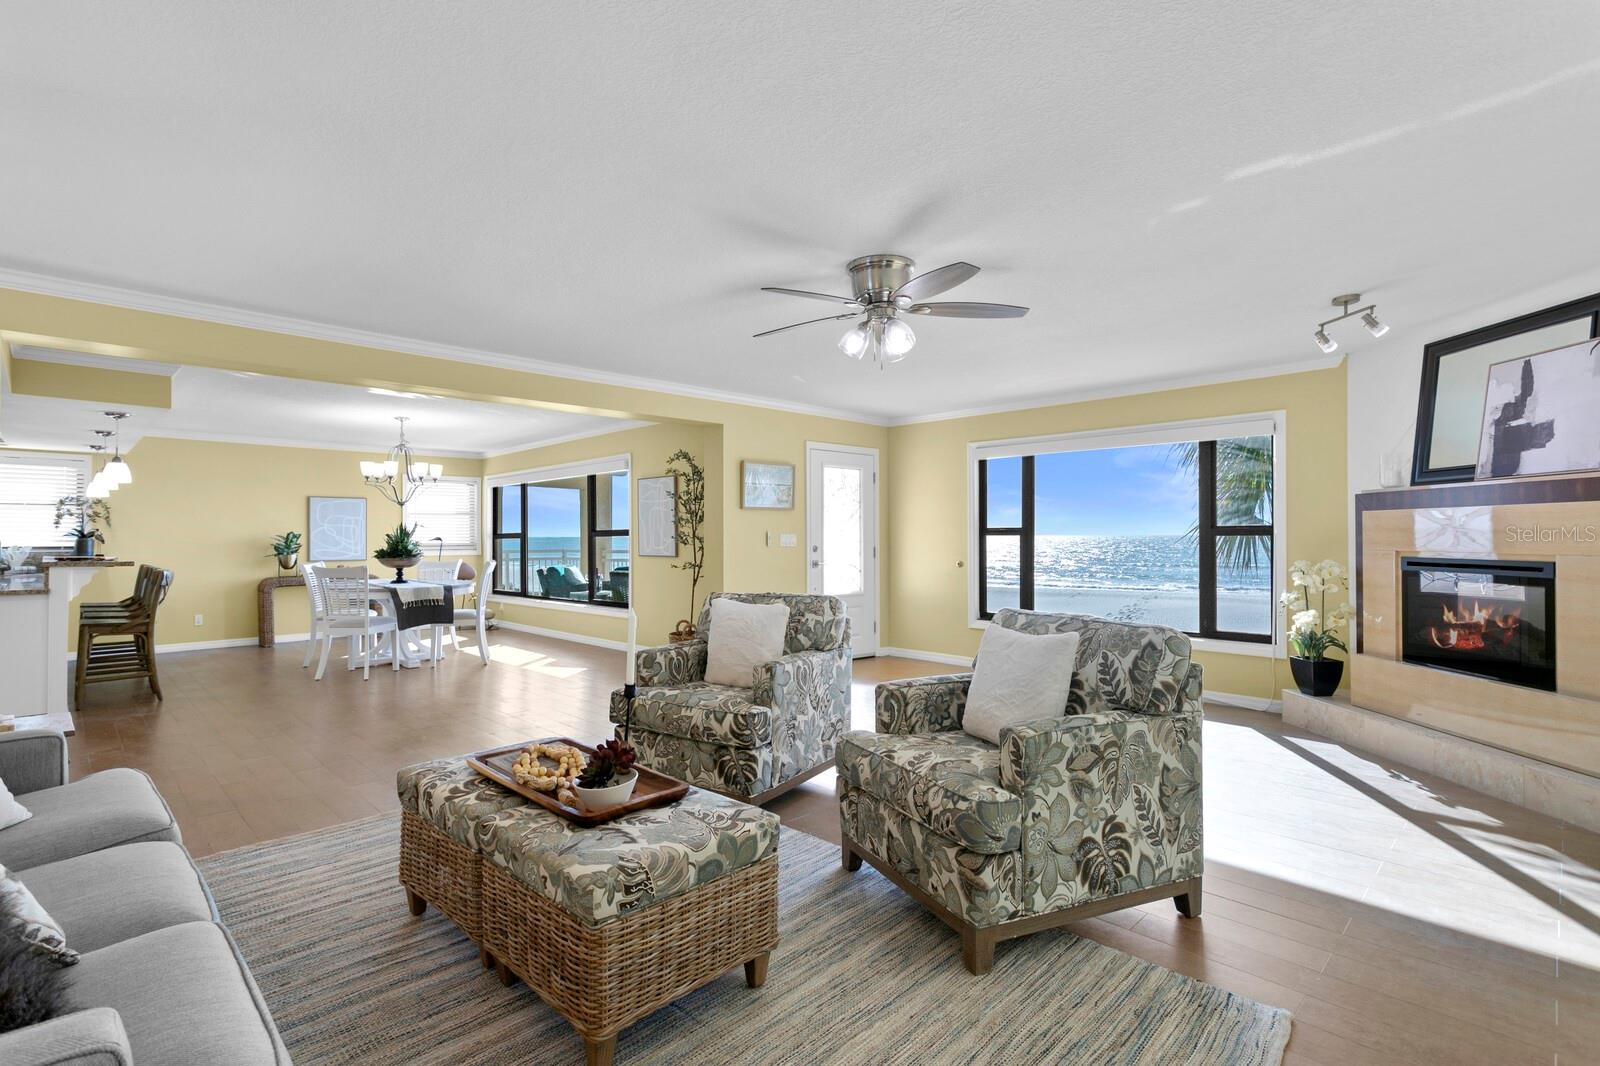 Get comfortable in this coastal room, complete with electric fireplace and panoramic beach views.